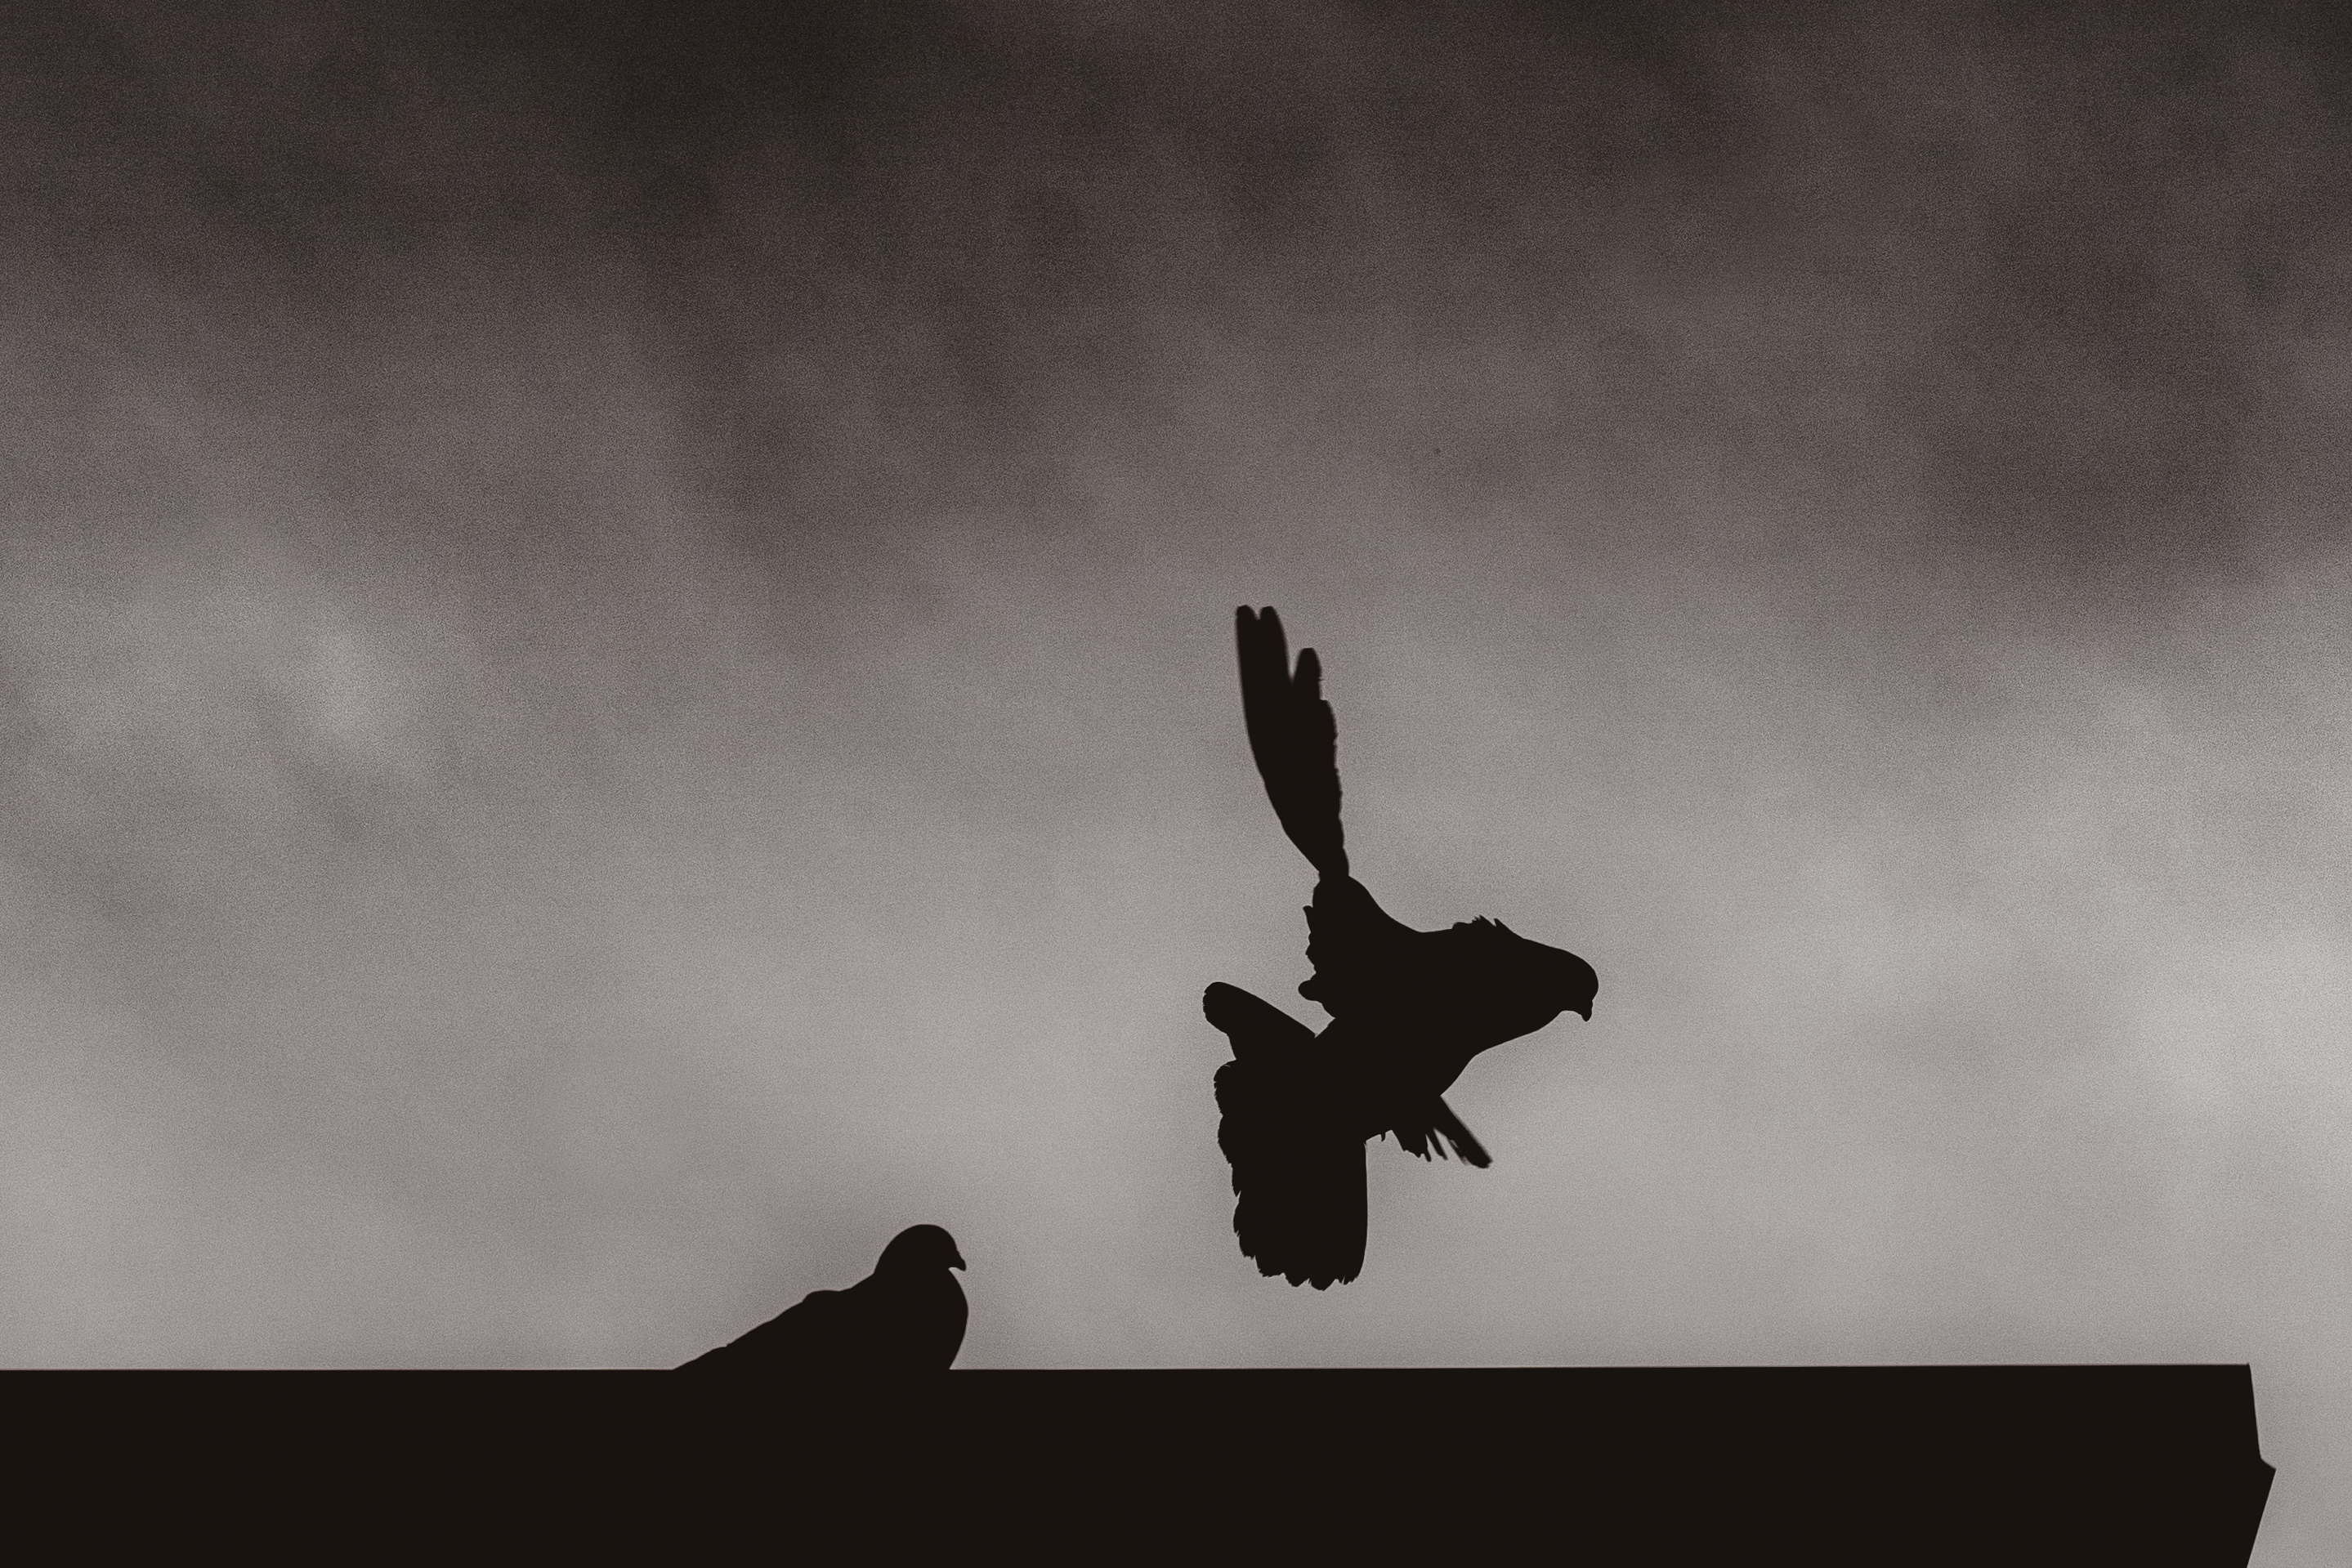 A black and white silhouette of a pigeon taking flight from a roof against a cloudy sky.